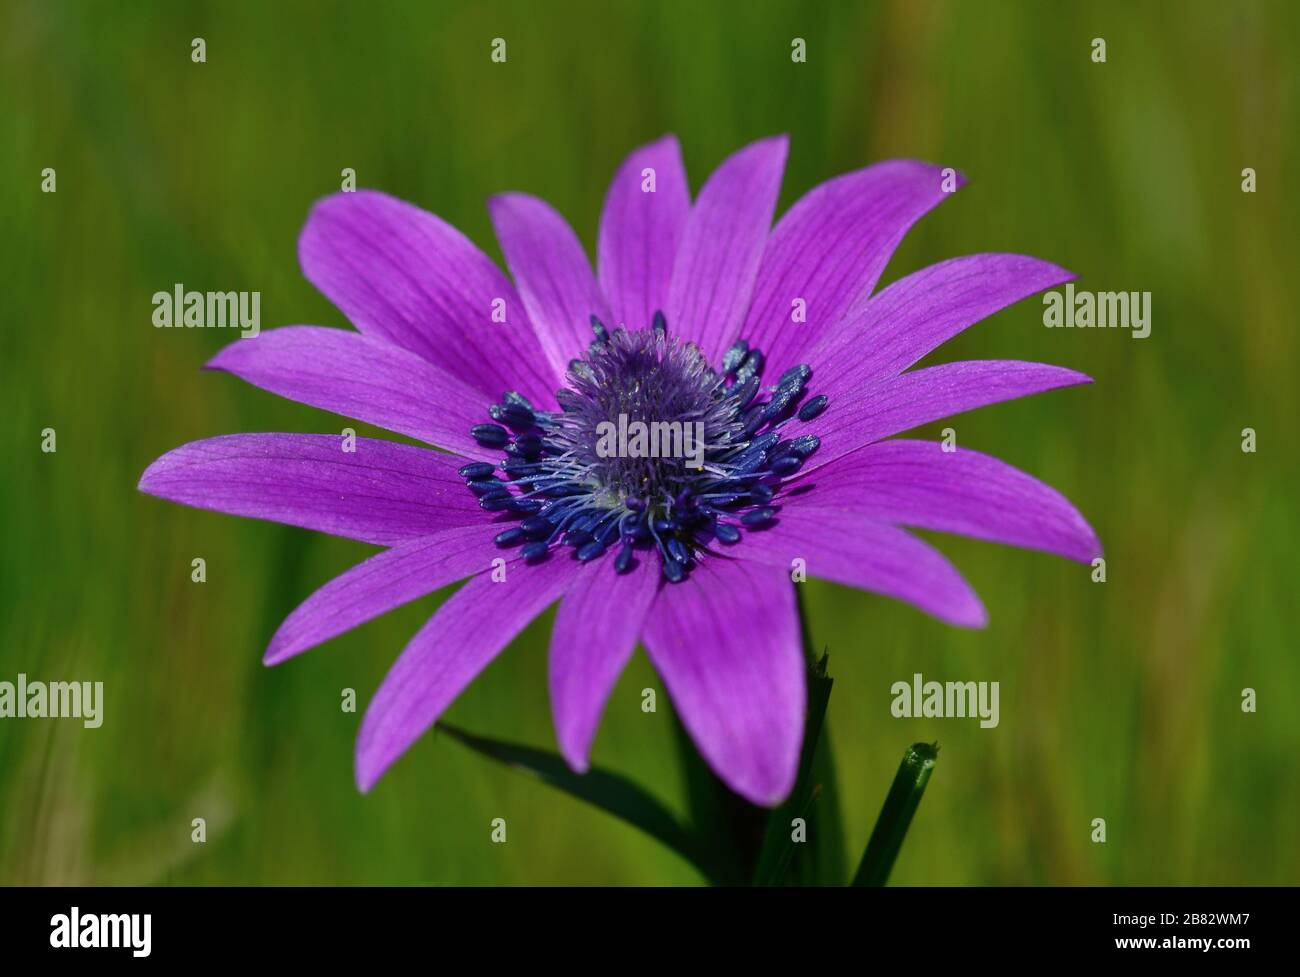 close-up of purple Anemone wildflower against a green blurred background Stock Photo